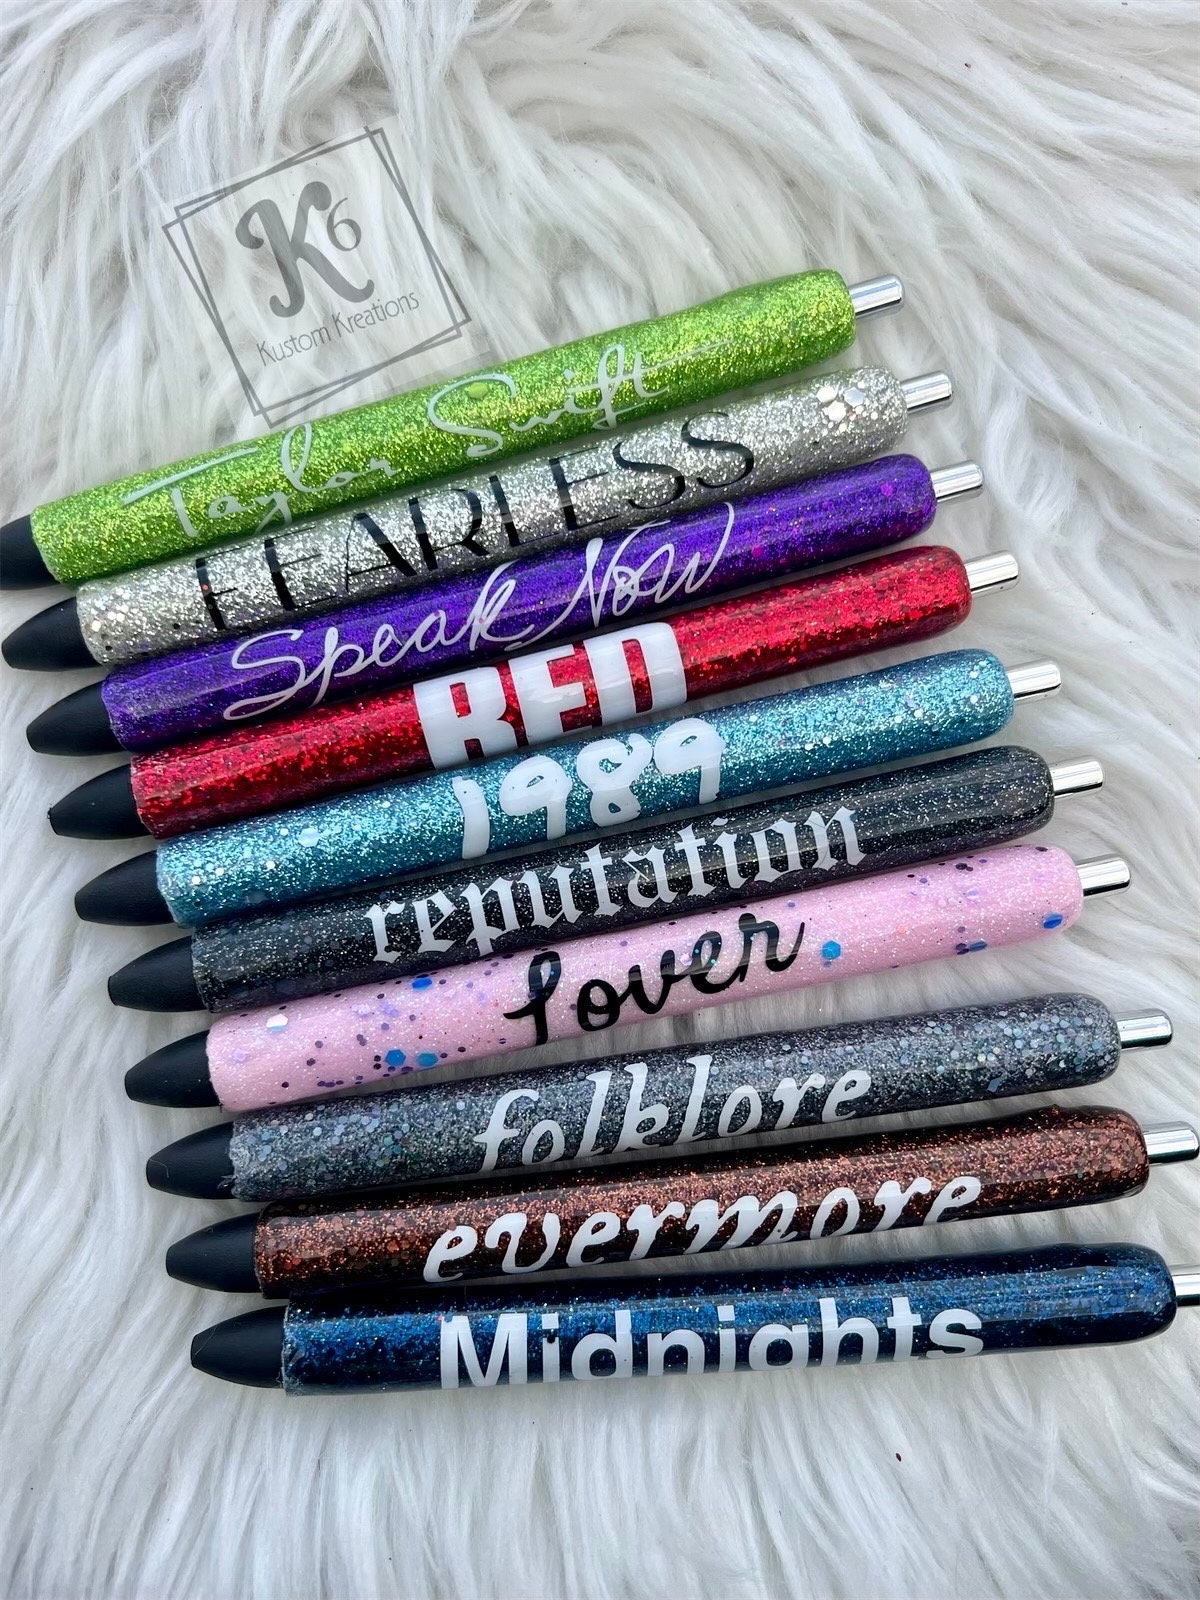 Taylor Swift Pencils - Customised Premium Natural Wood Pencils Featuring  1989 Song Titles